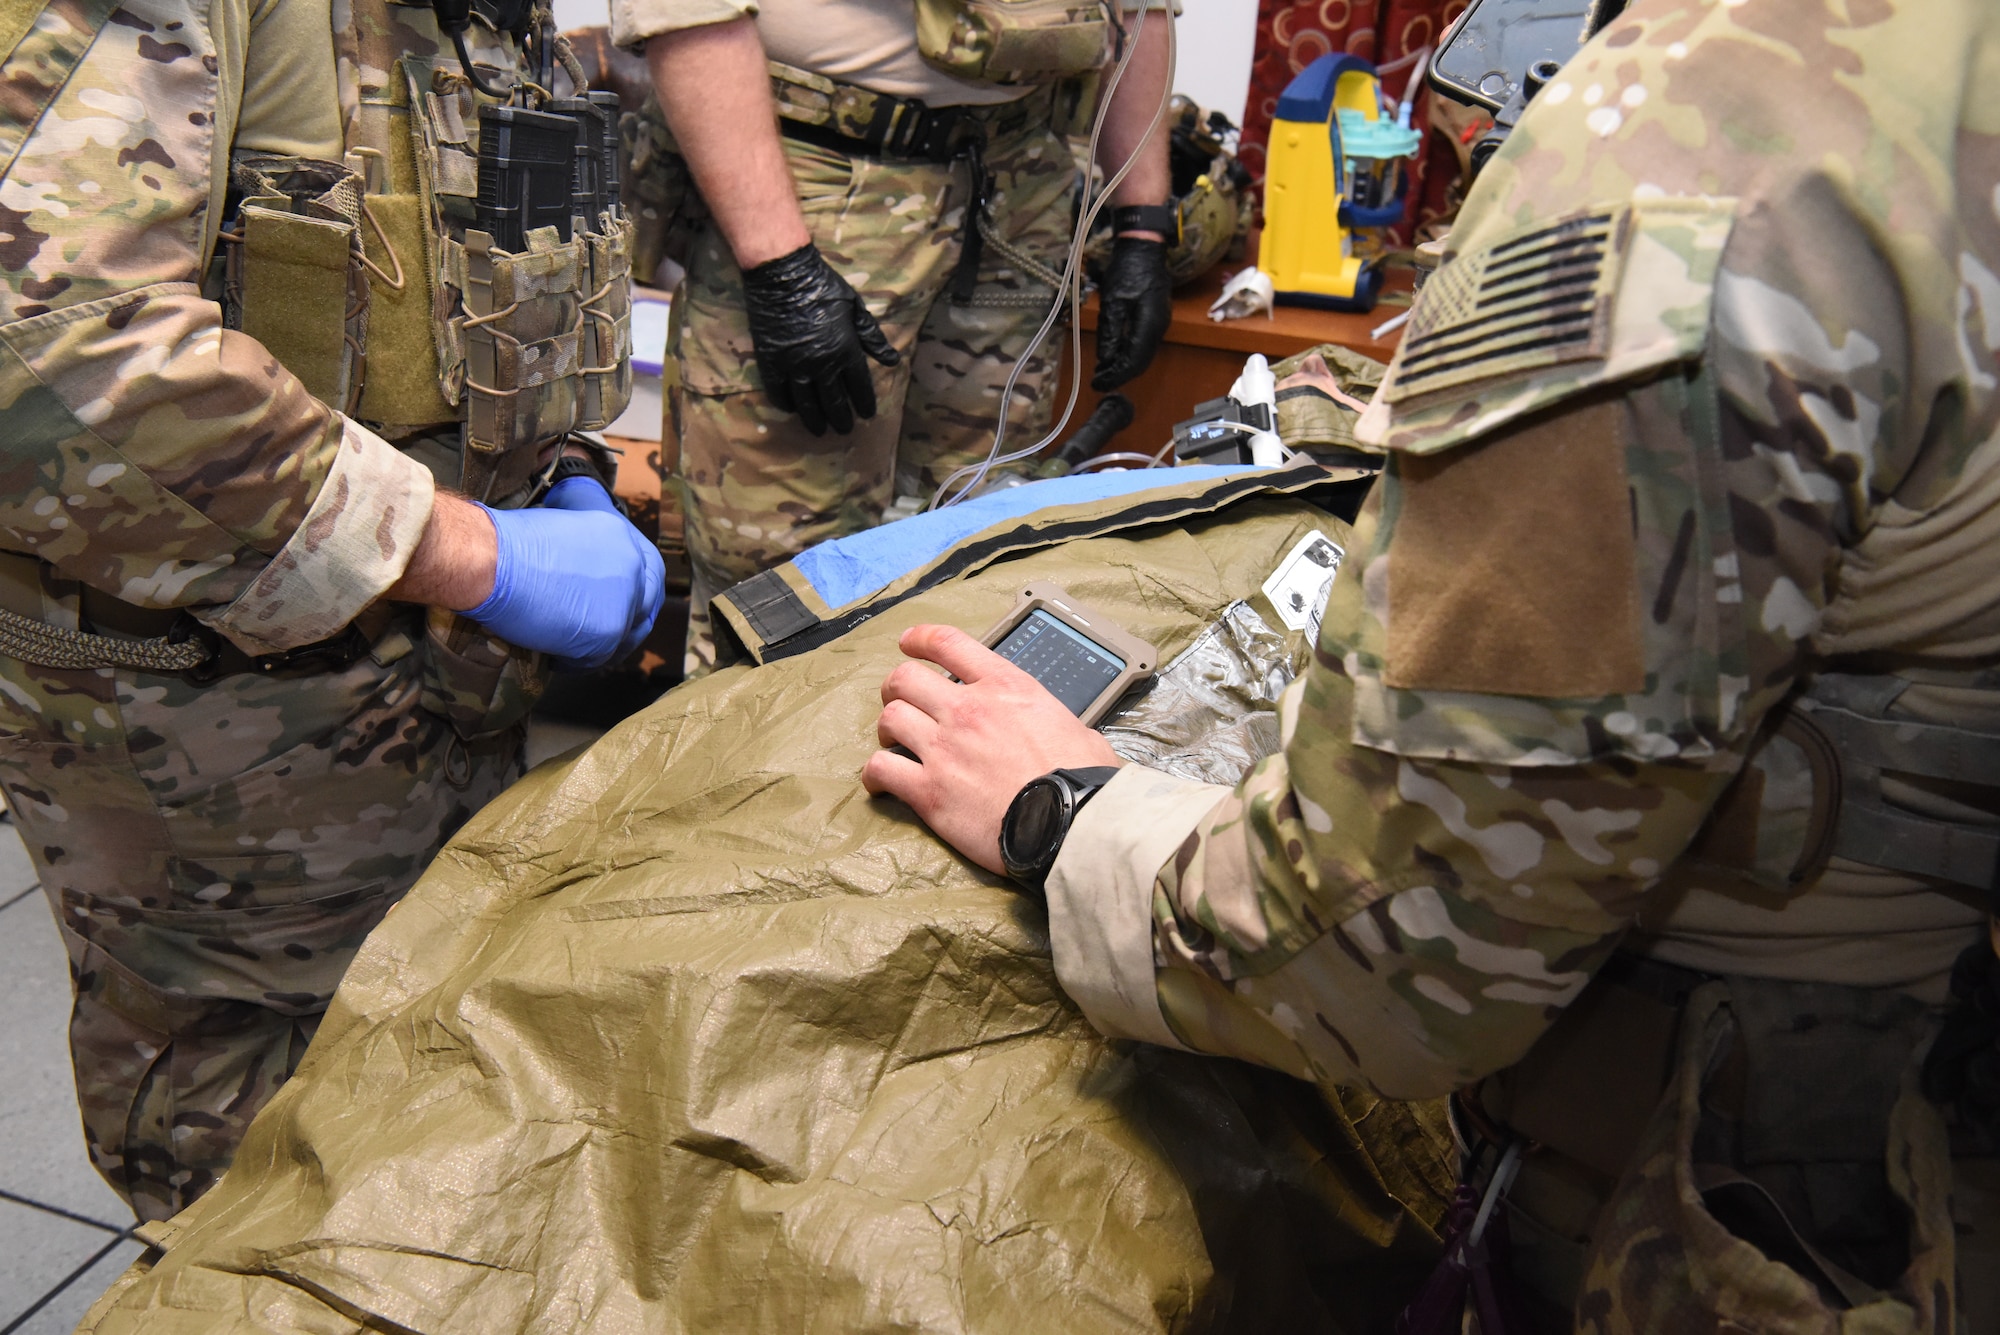 U.S. Air Force Pararescuemen conduct prolonged casualty care to a severely wounded mannequin.